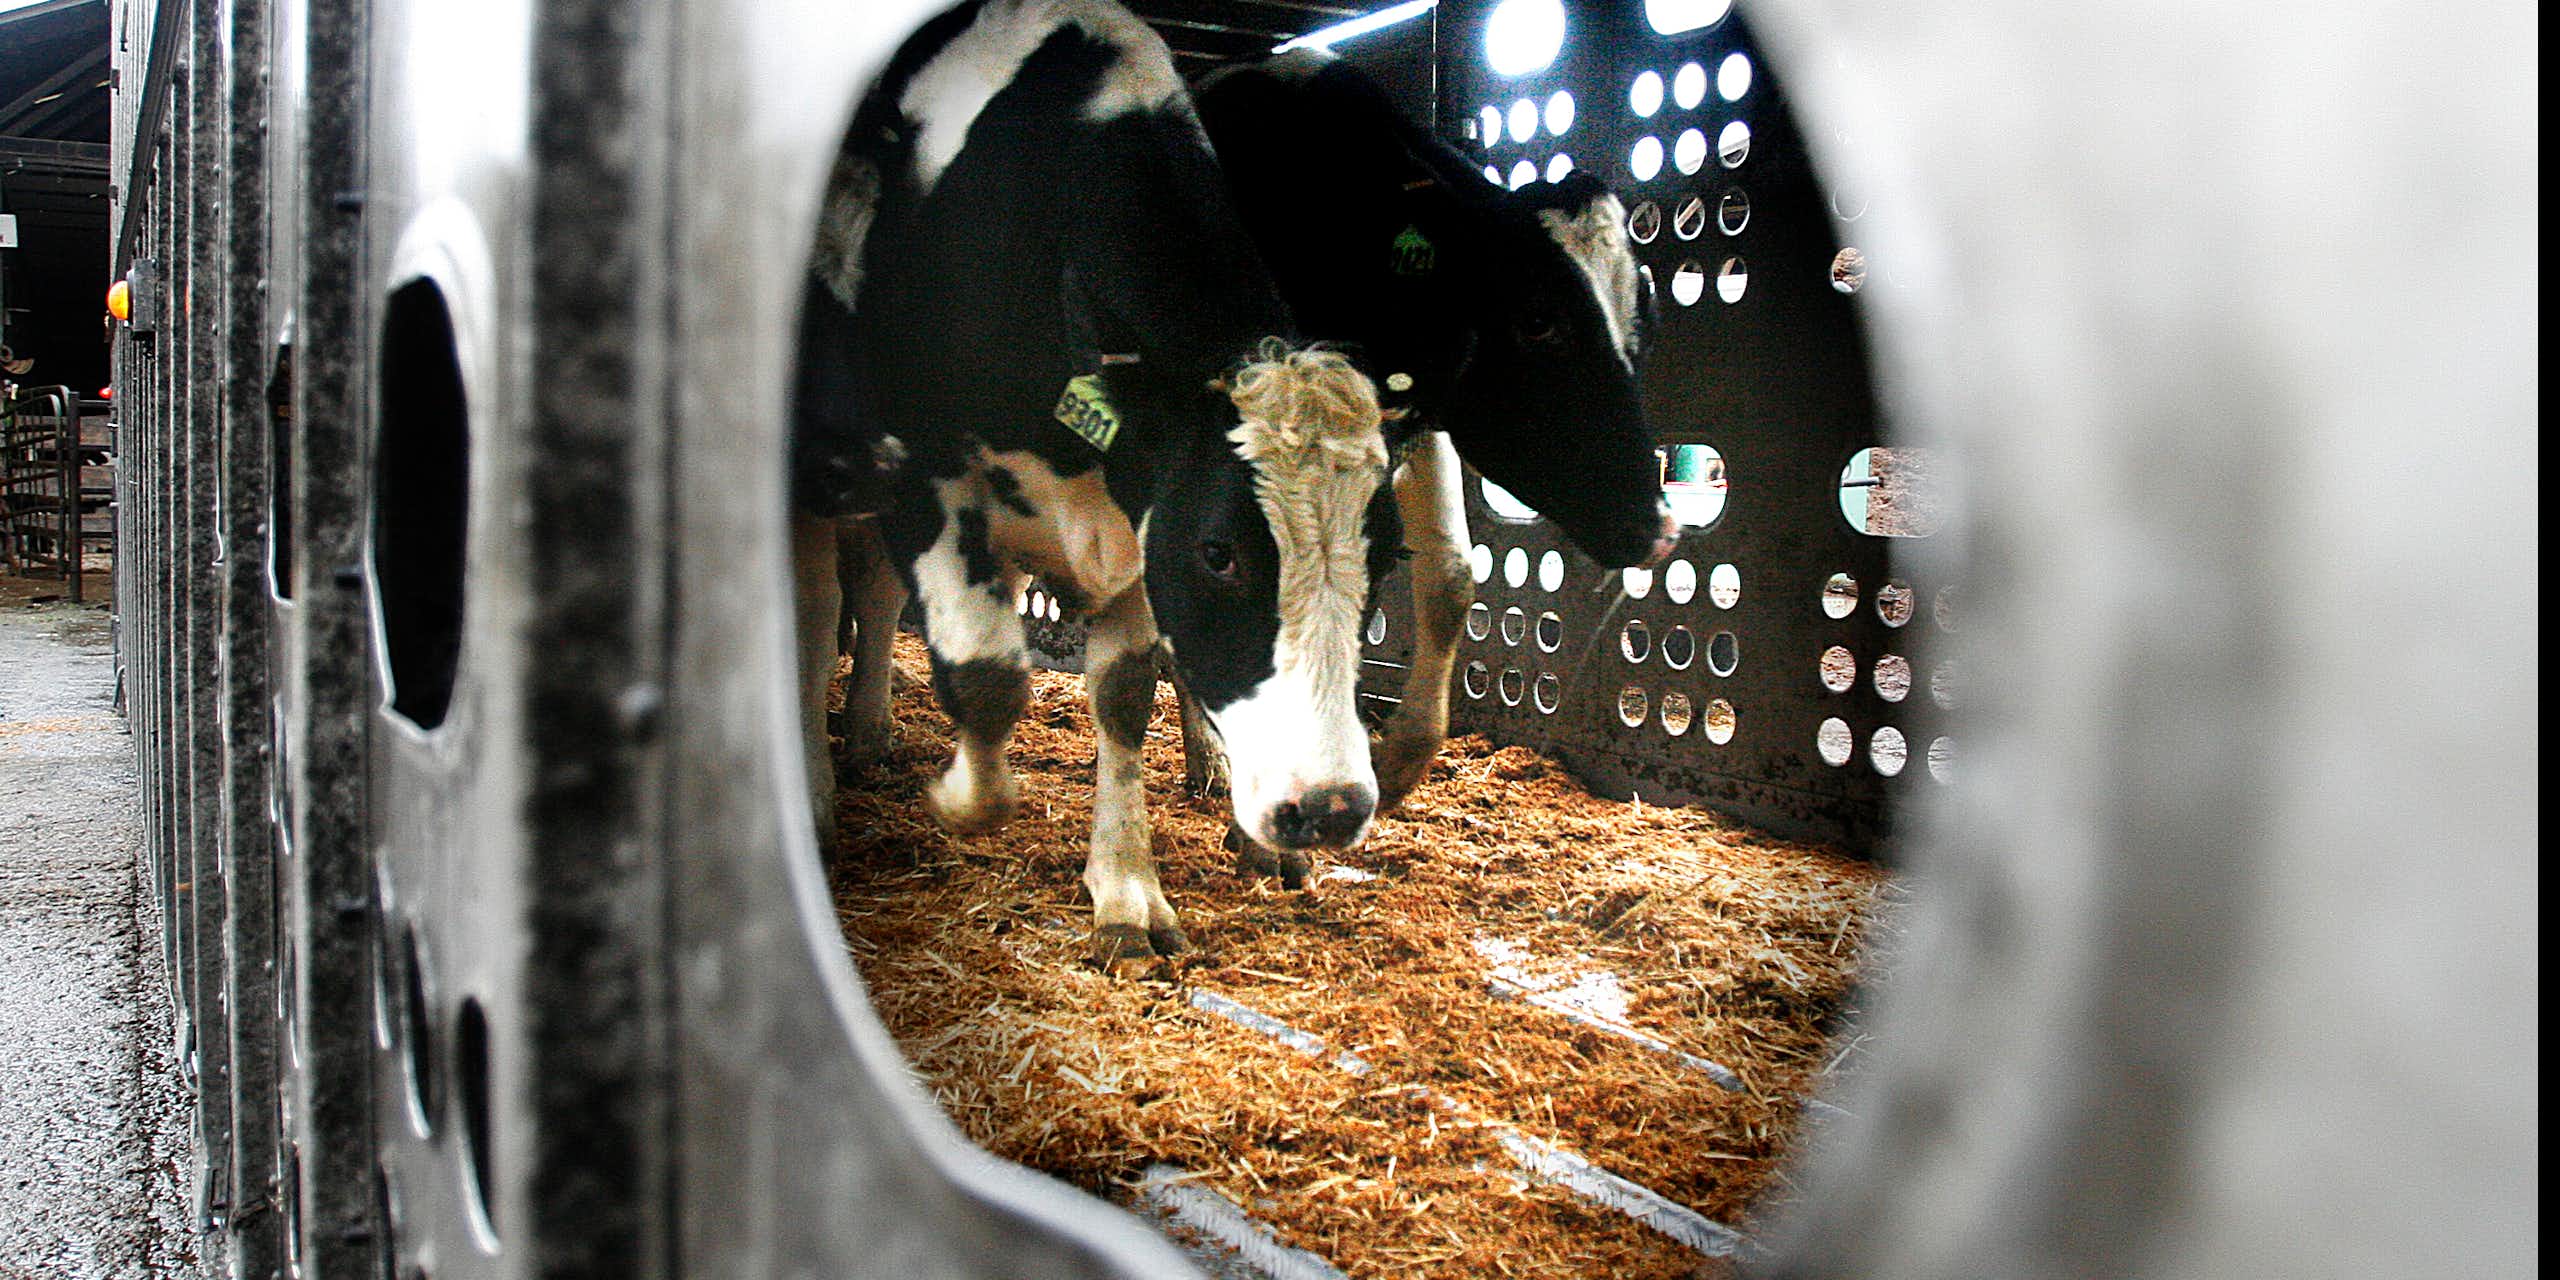 Peering through a window into a truck being loaded with dairy cows